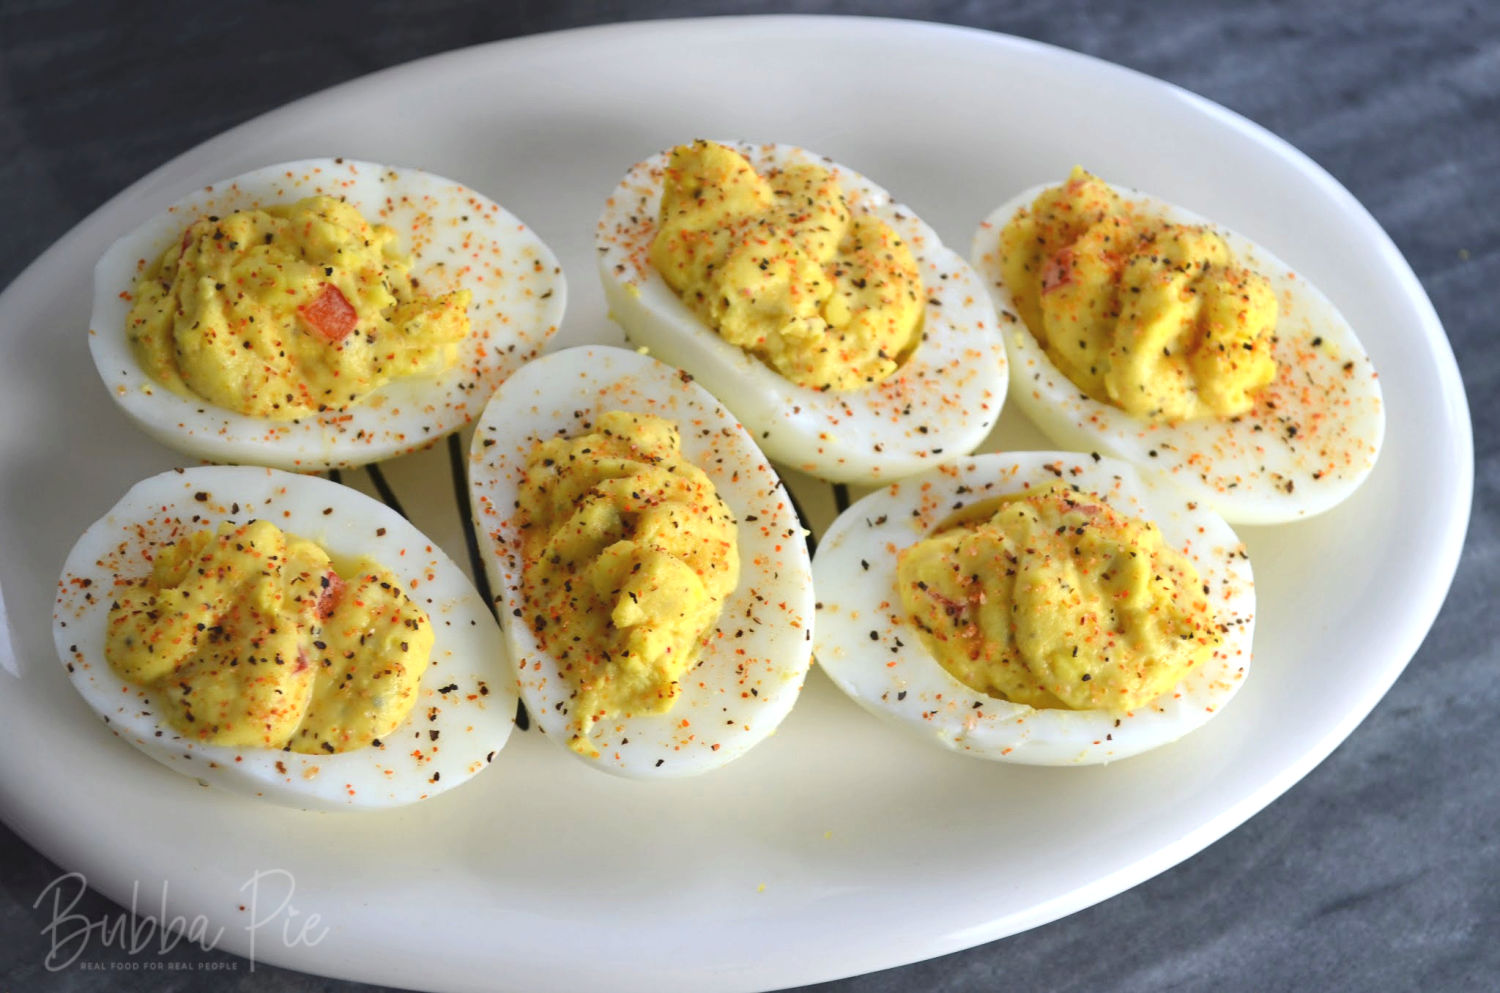 cajun deviled eggs puts a spicy twist on this classic appetizer